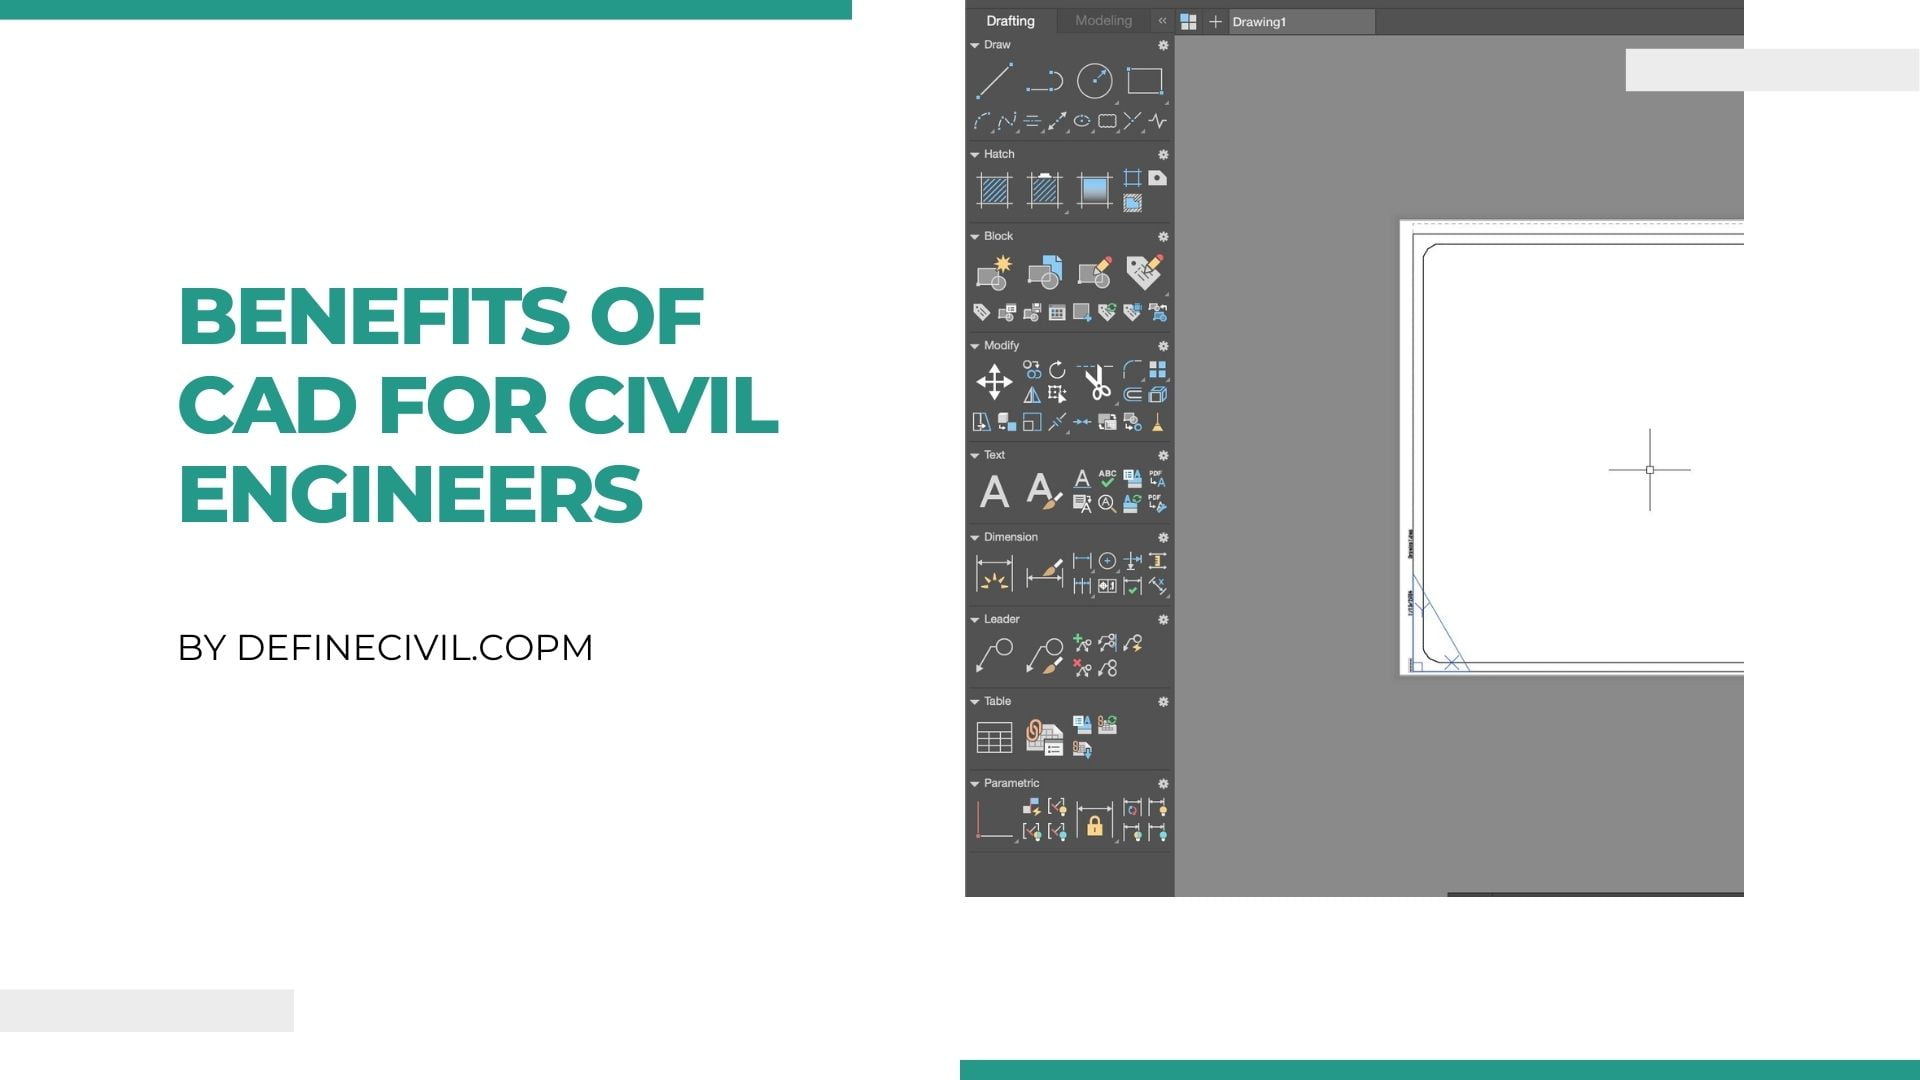 BENEFITS OF CAD FOR CIVIL ENGINEERS